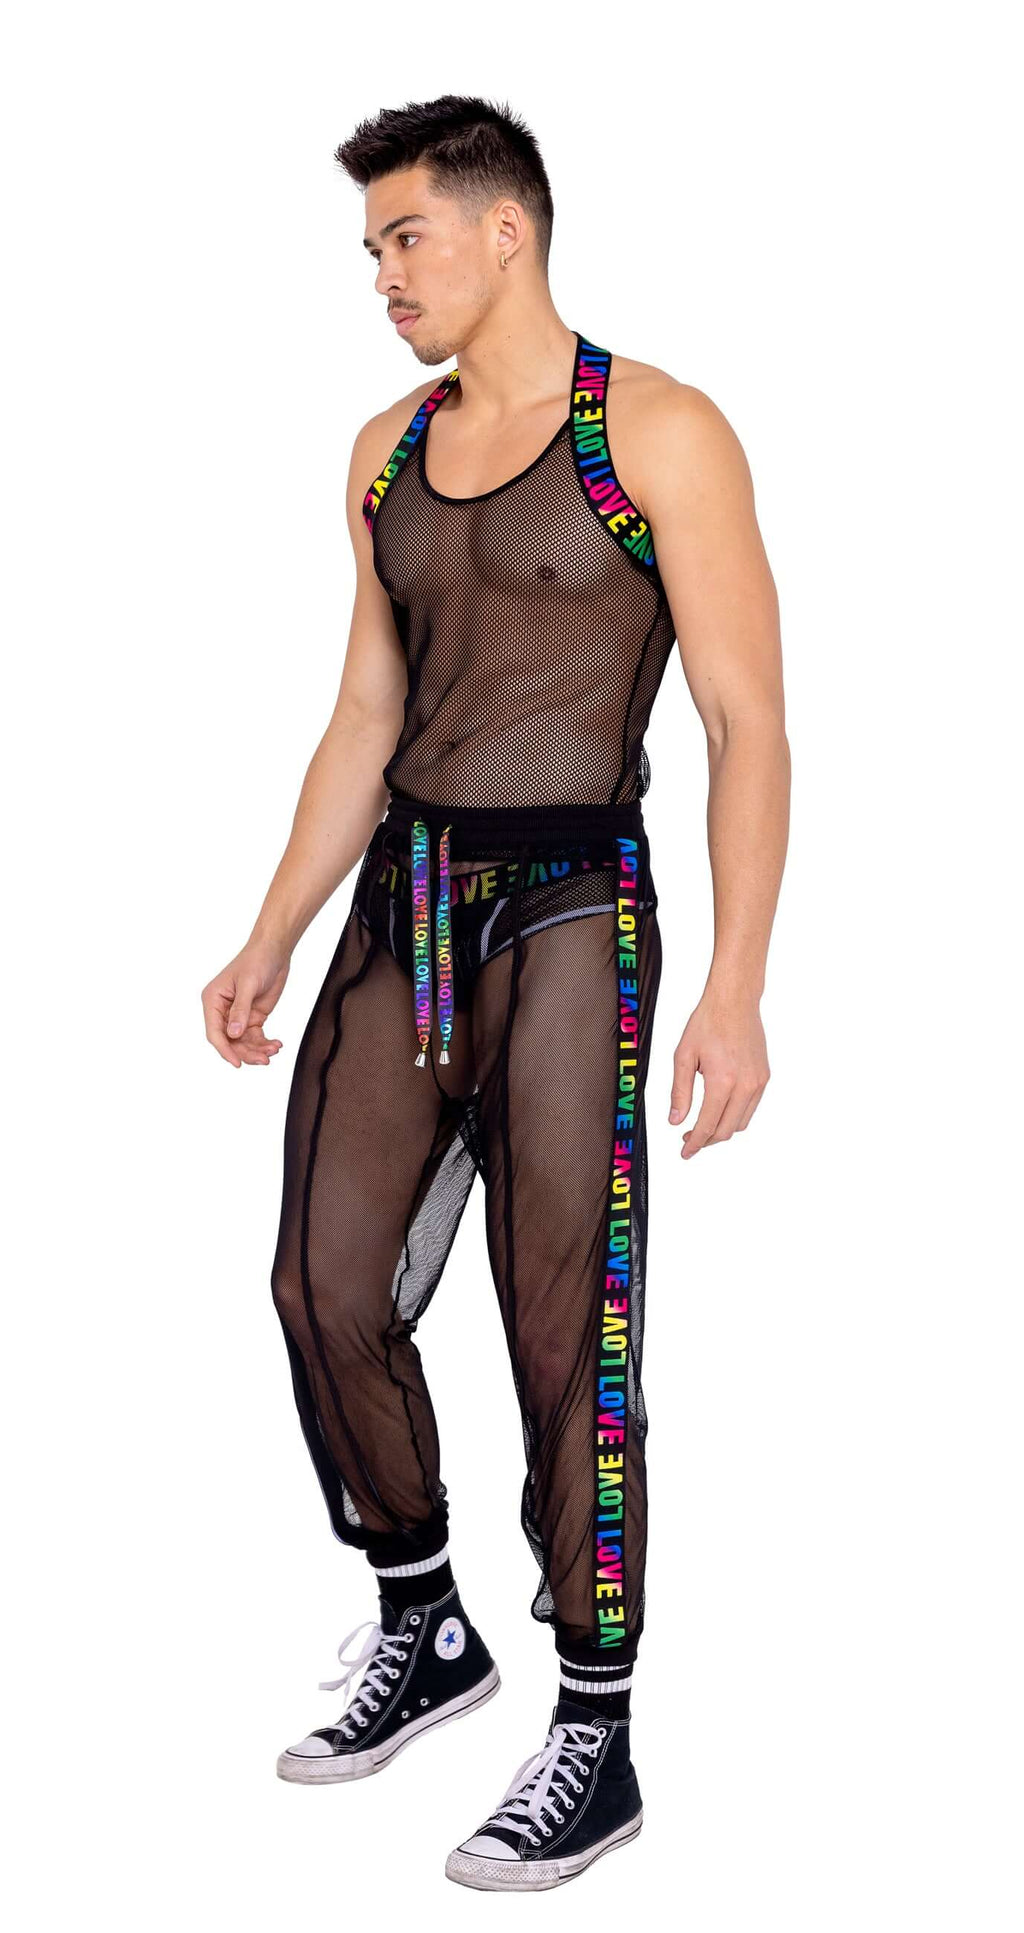 Mens Rave Clothing - Male Rave Outfits, Edc Outfits for Guys – Tagged 